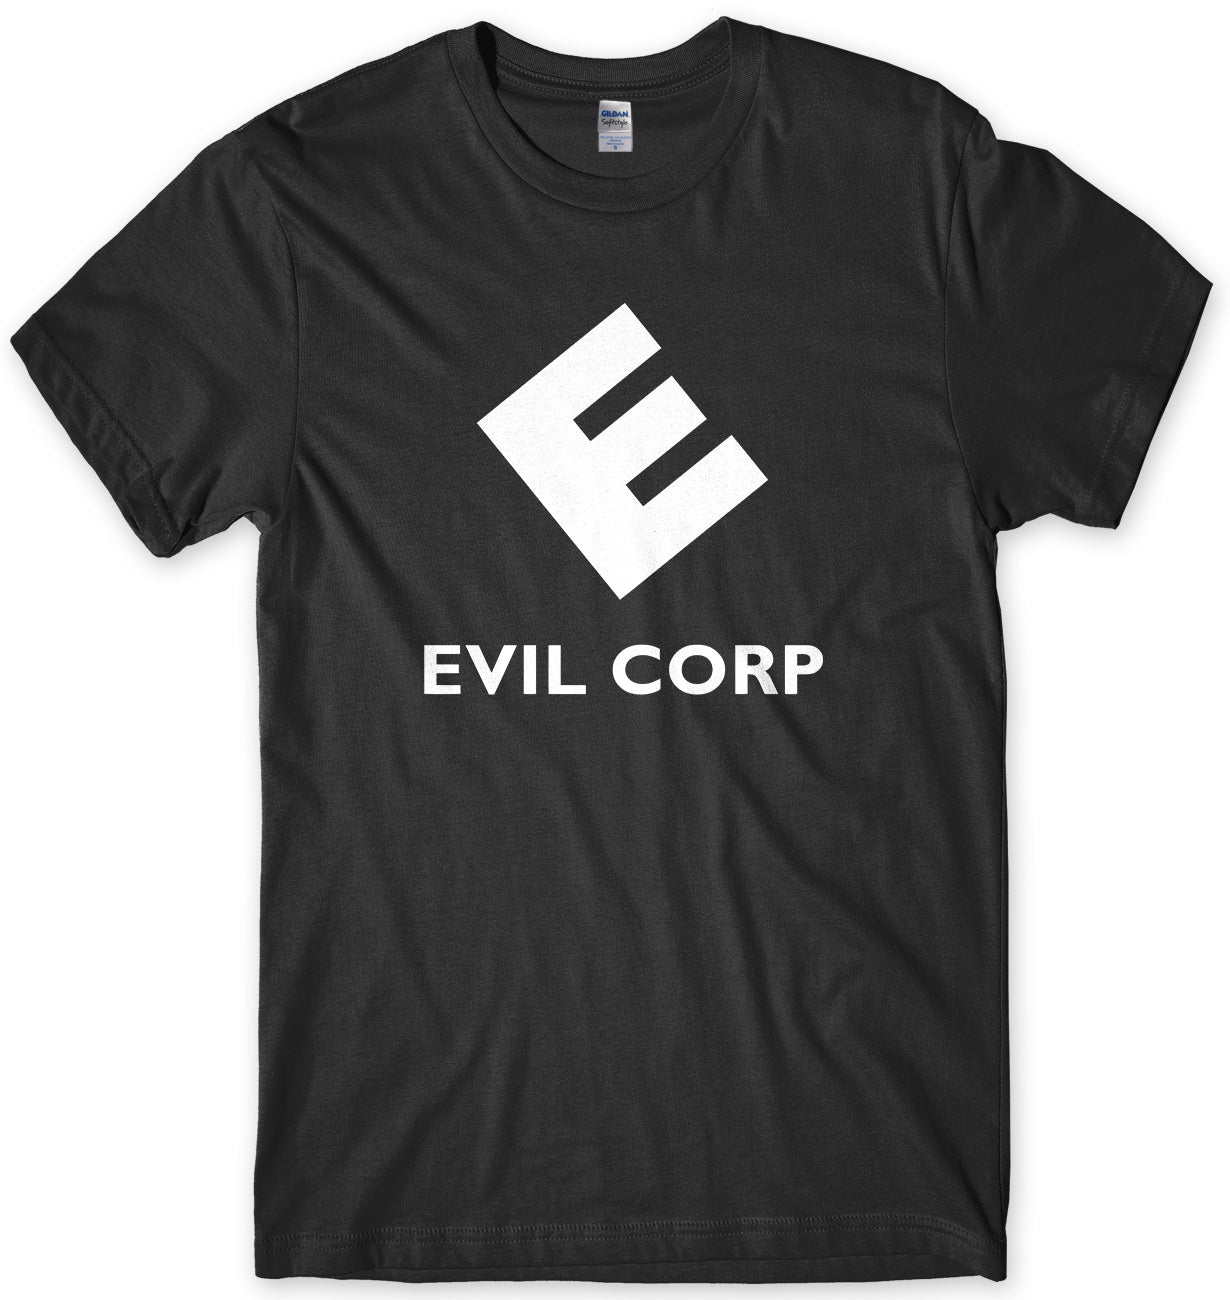 EVIL CORP - INSPIRED BY MR ROBOT MENS UNISEX T-SHIRT